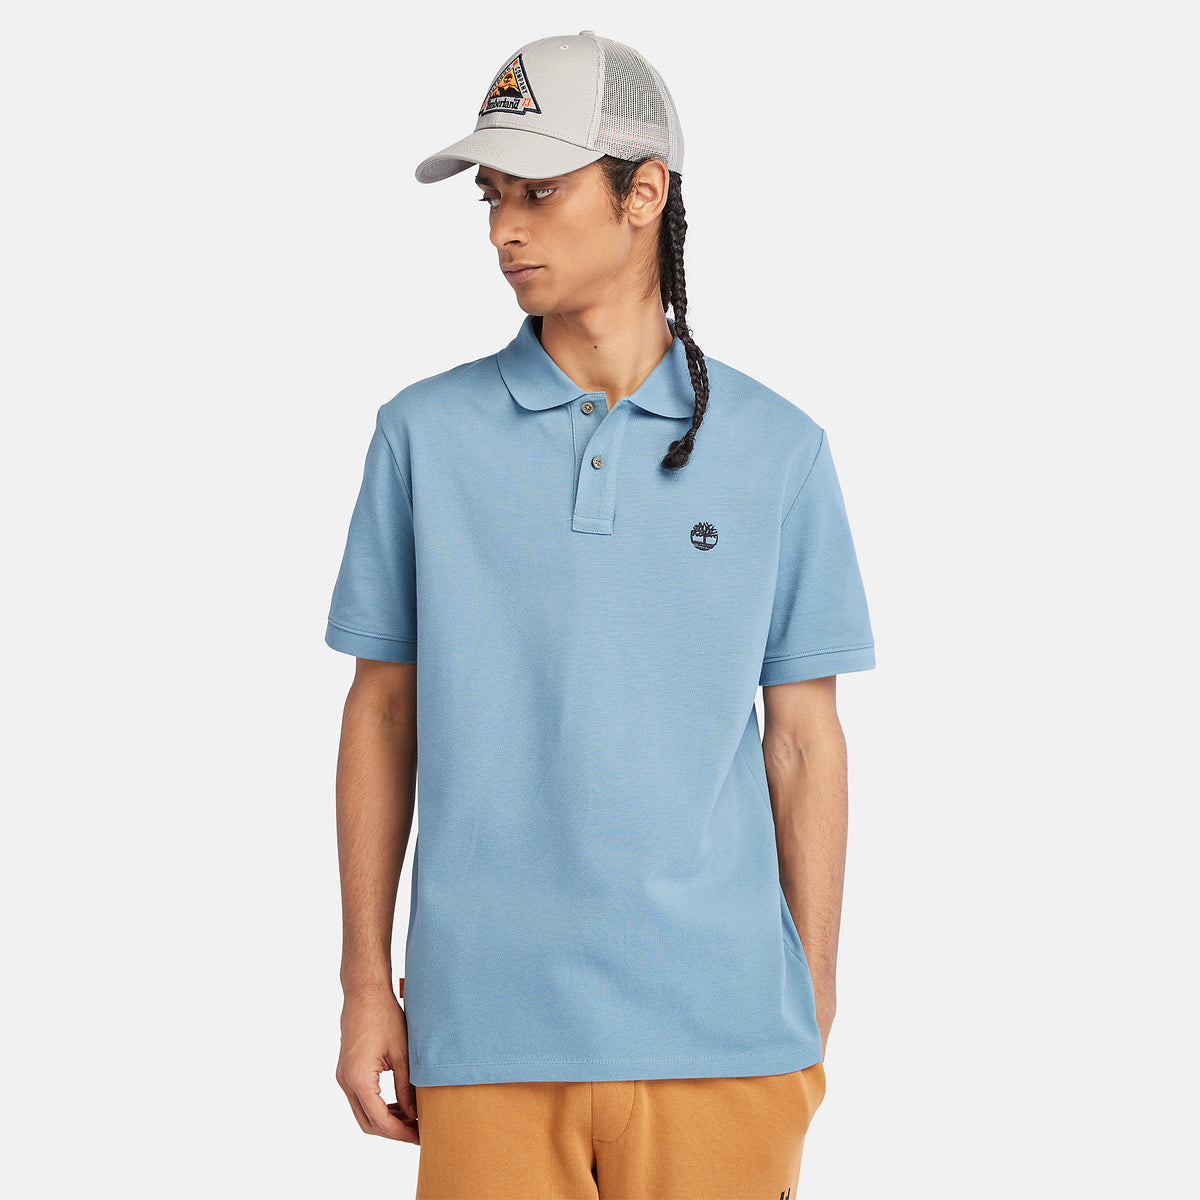 Timberland Mens Millers River Pique Polo T-Shirt - Short Sleeved, 05, Tb0A26N4, #colour_Captain's Blue